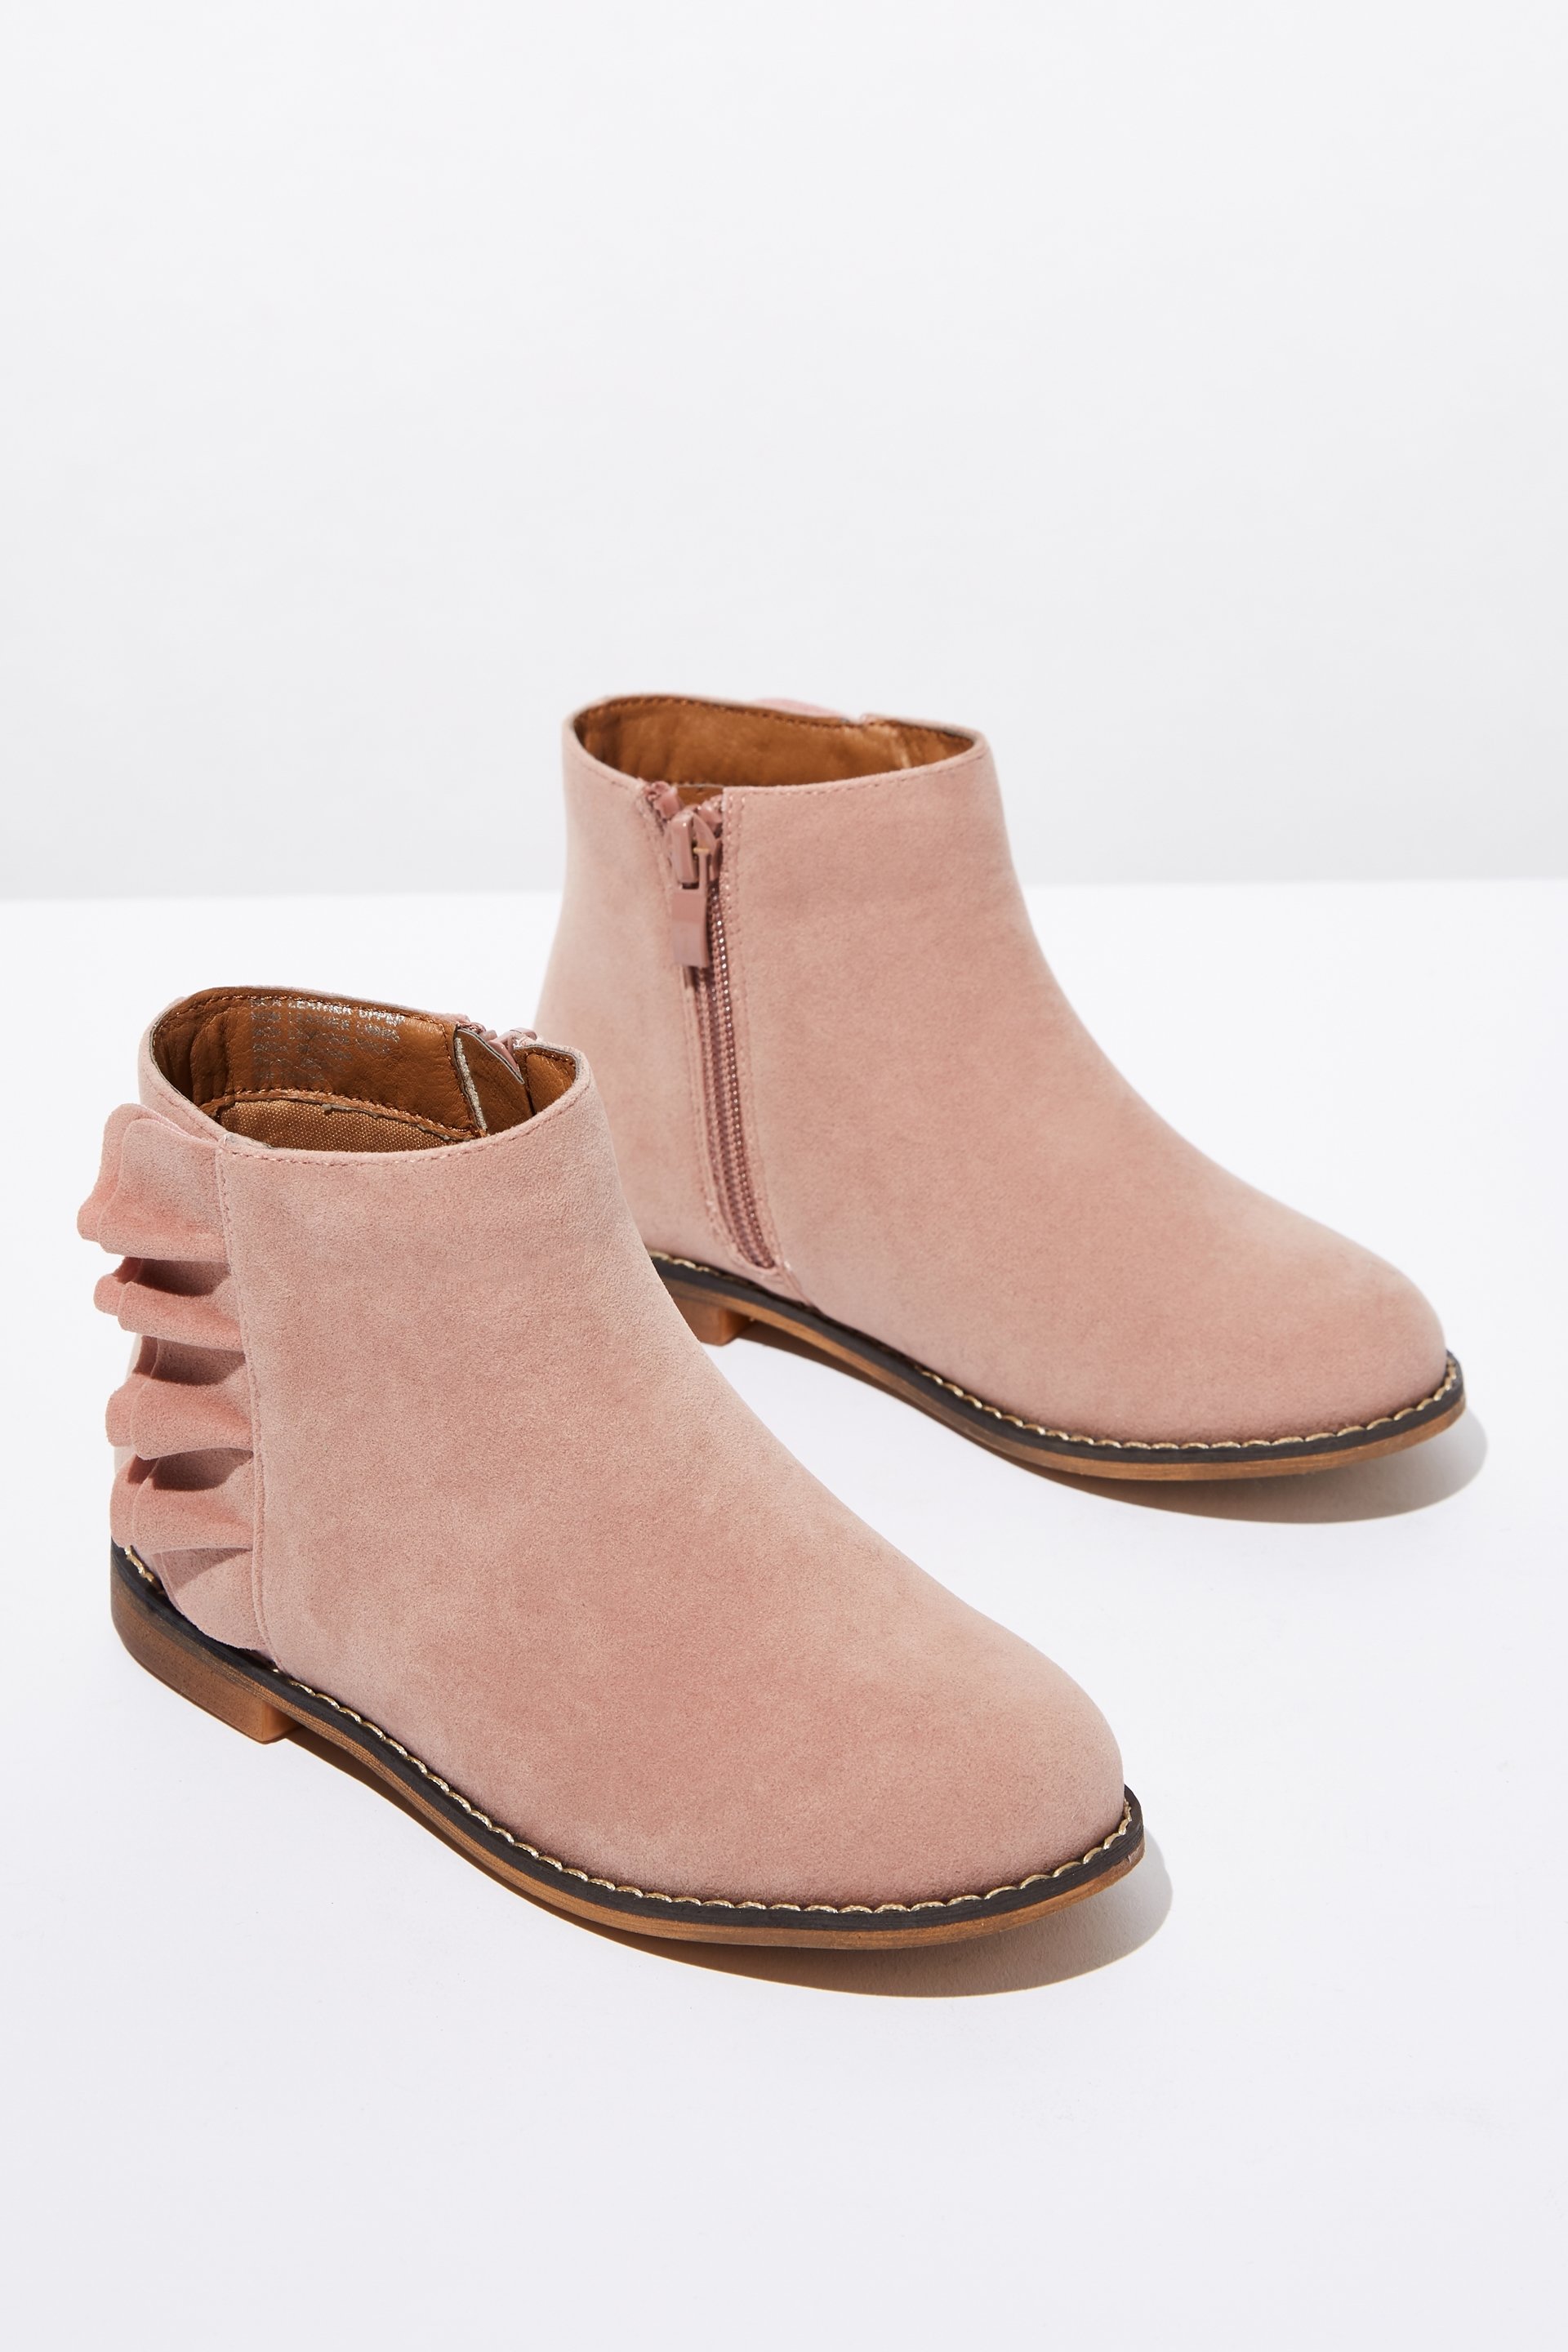 Cotton On Kids - Ruffle Ankle Boot - Pink